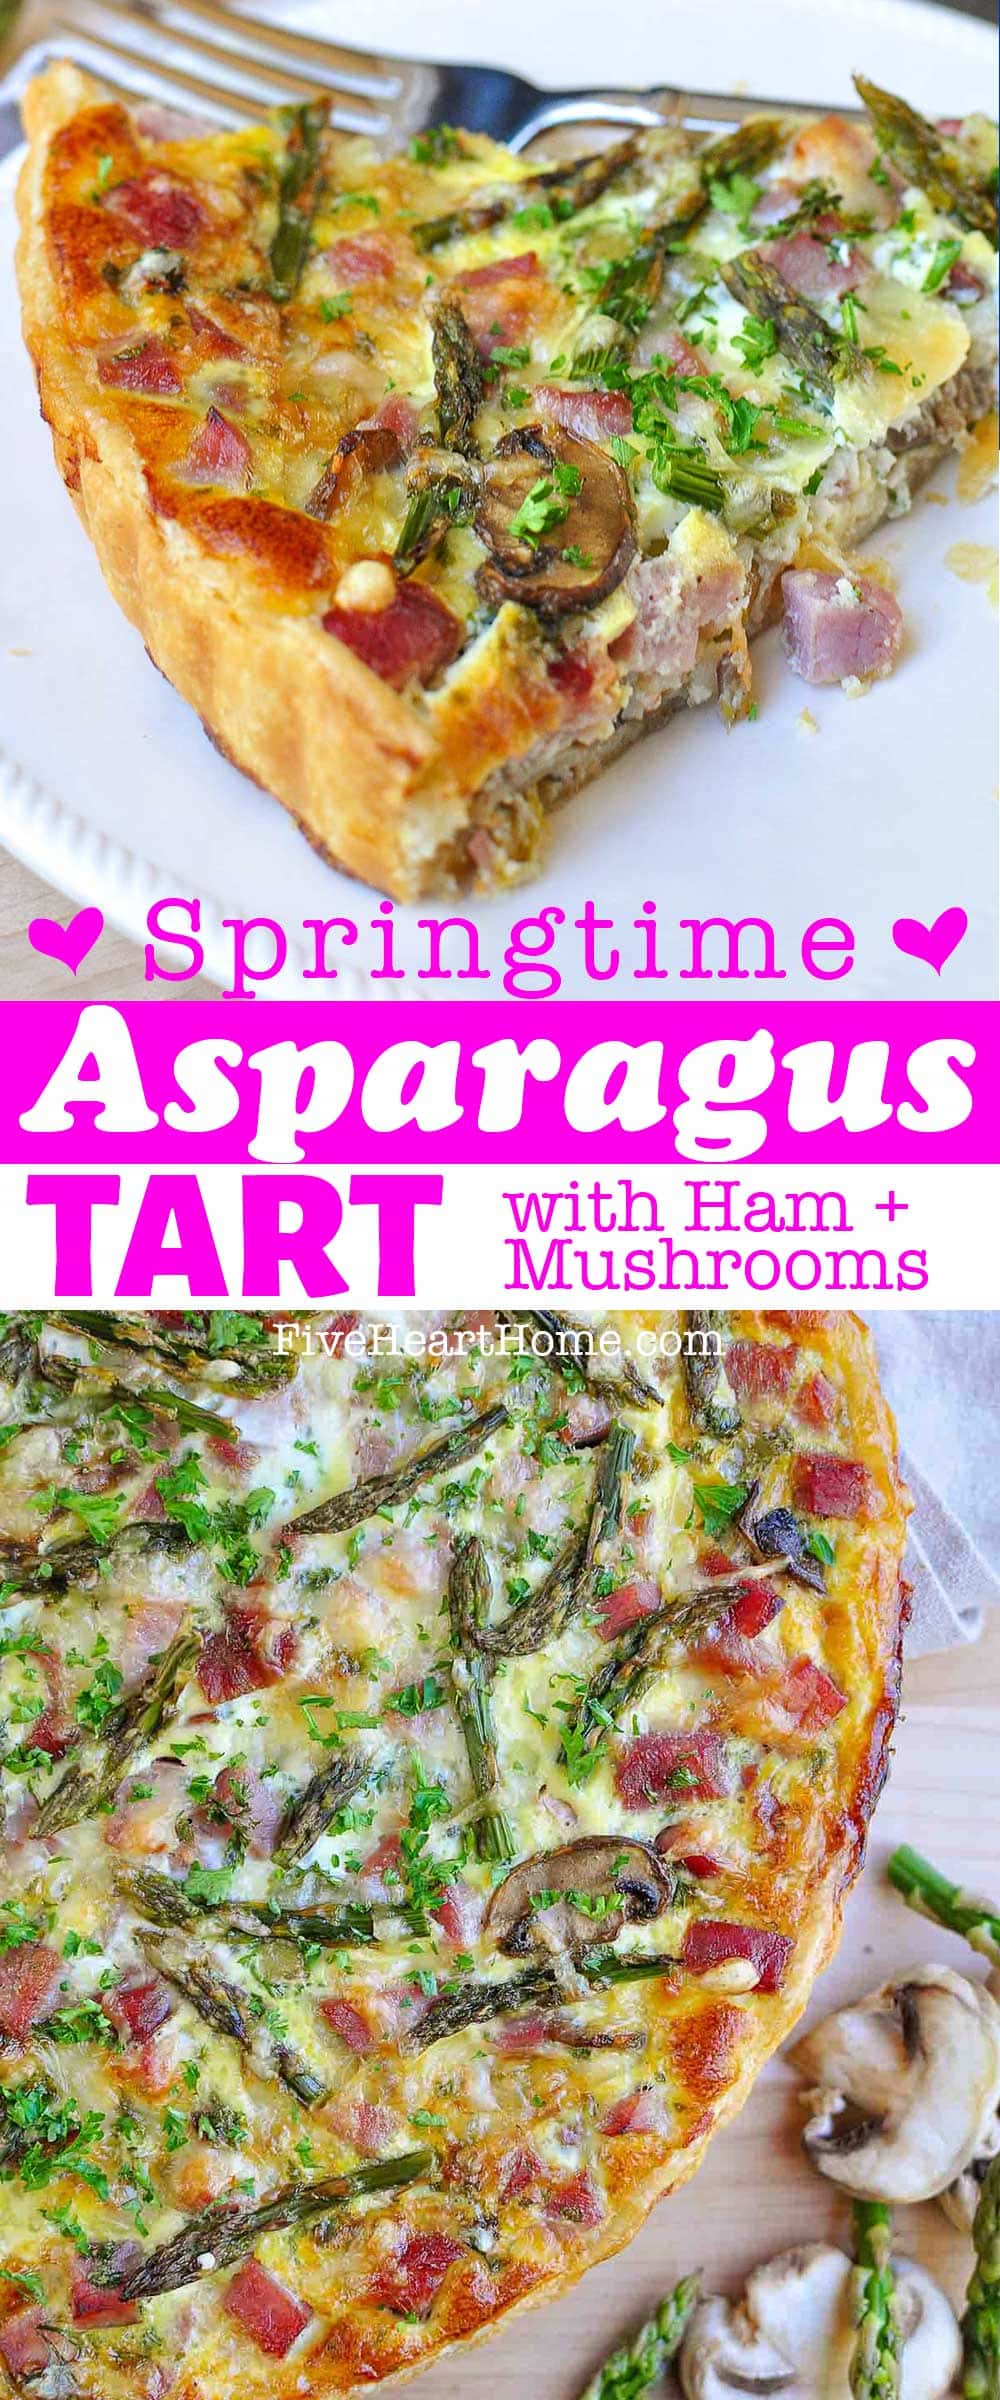 Asparagus Tart ~ this lovely springtime tart will be the star of your brunch, lunch, or light dinner, between its garlic-laced asparagus and mushrooms, savory ham and Swiss, and flaky, buttery crust! | FiveHeartHome.com via @fivehearthome